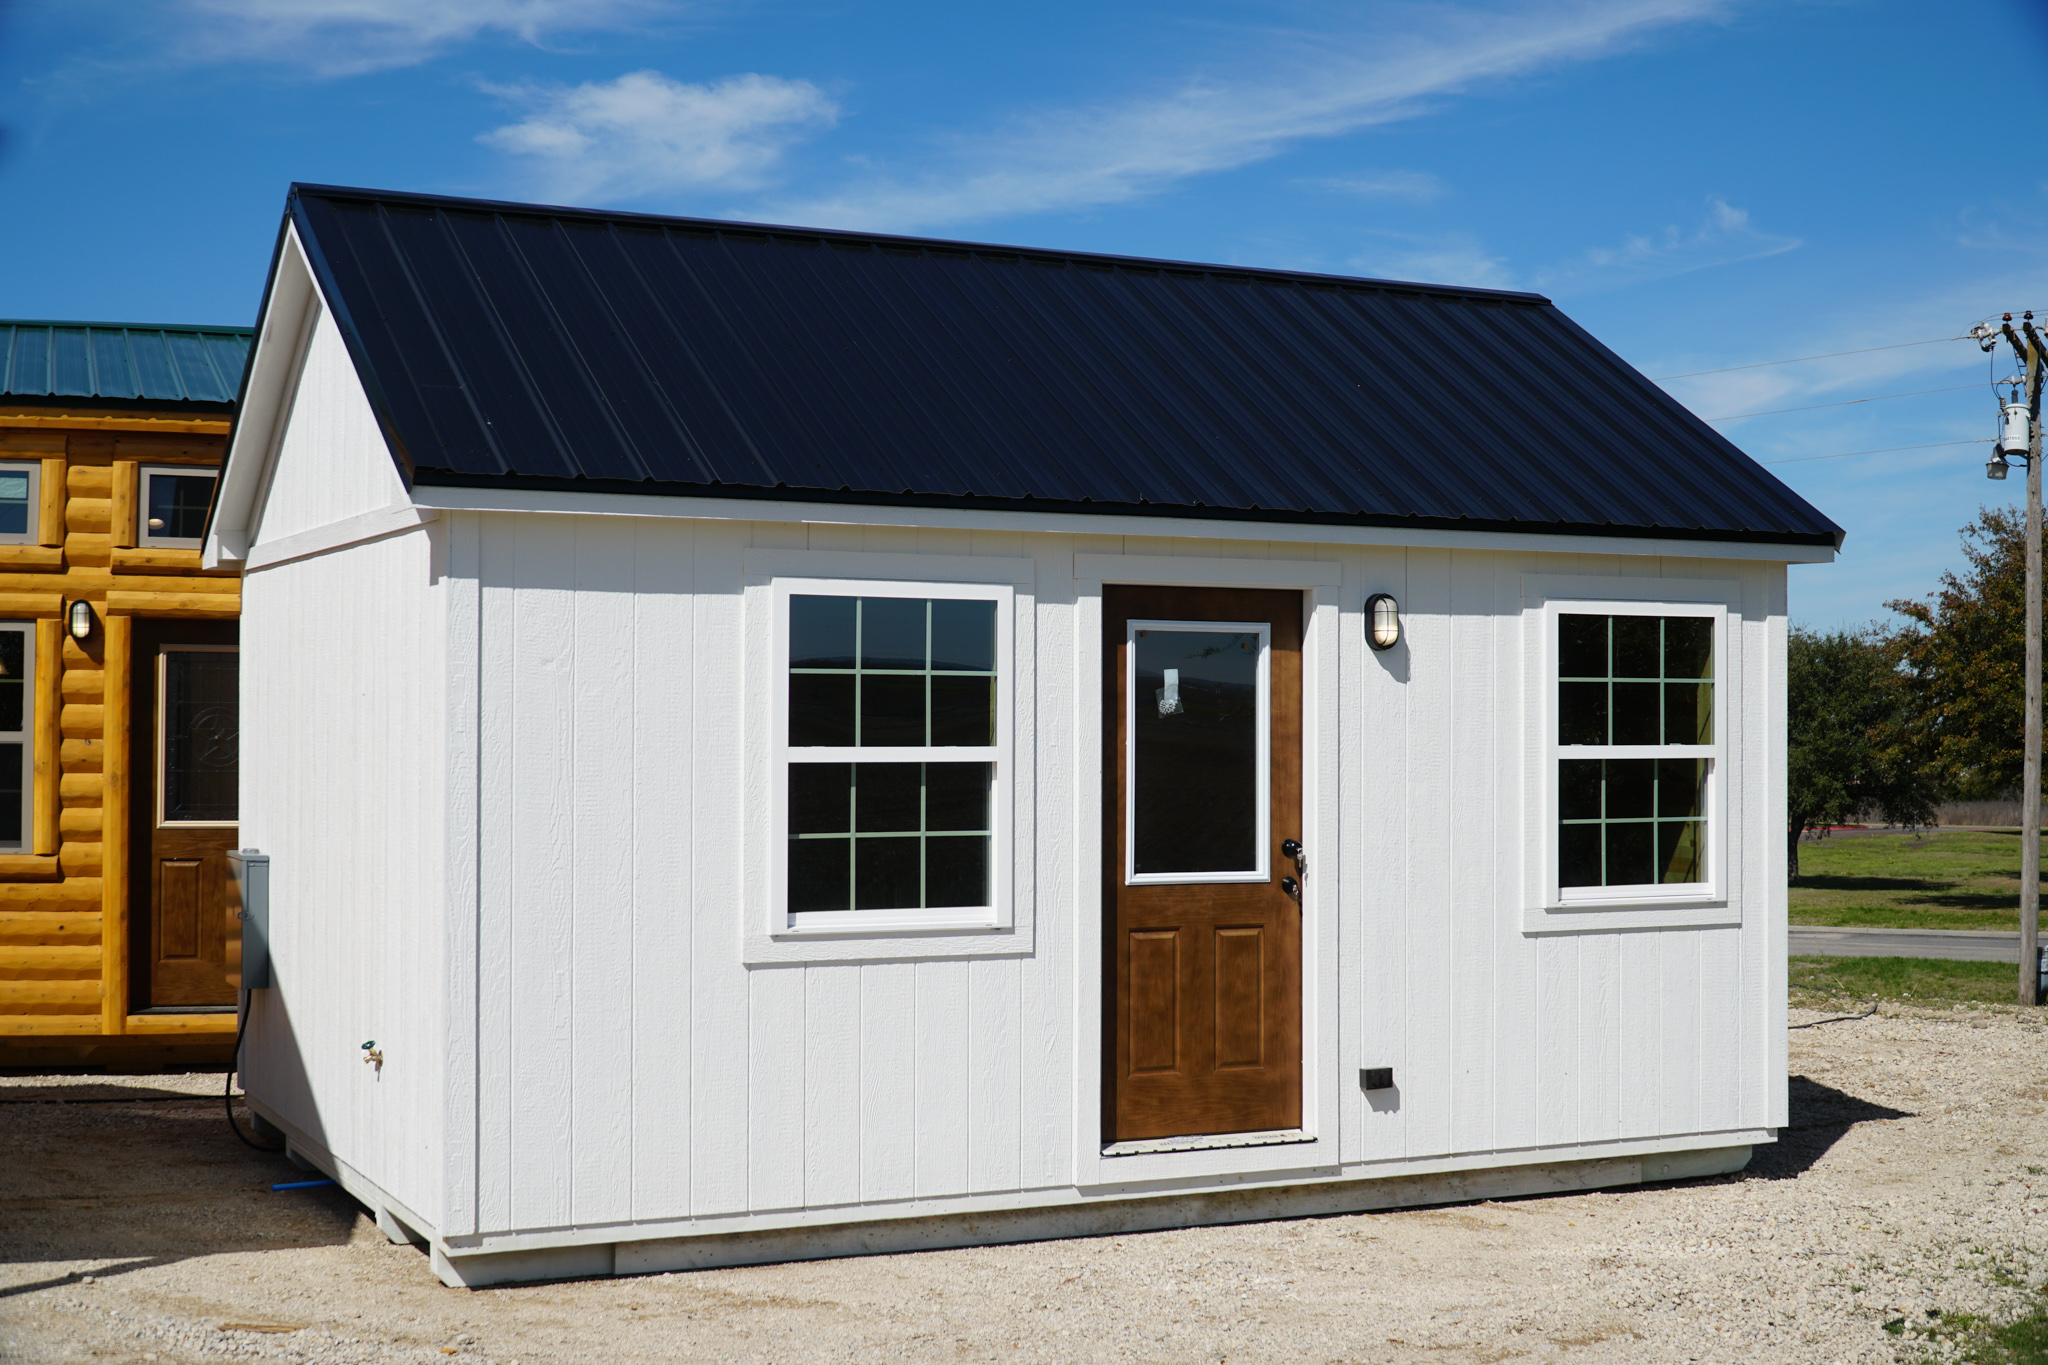 Office Exterior - An Office or Classroom in Your Own Back Yard